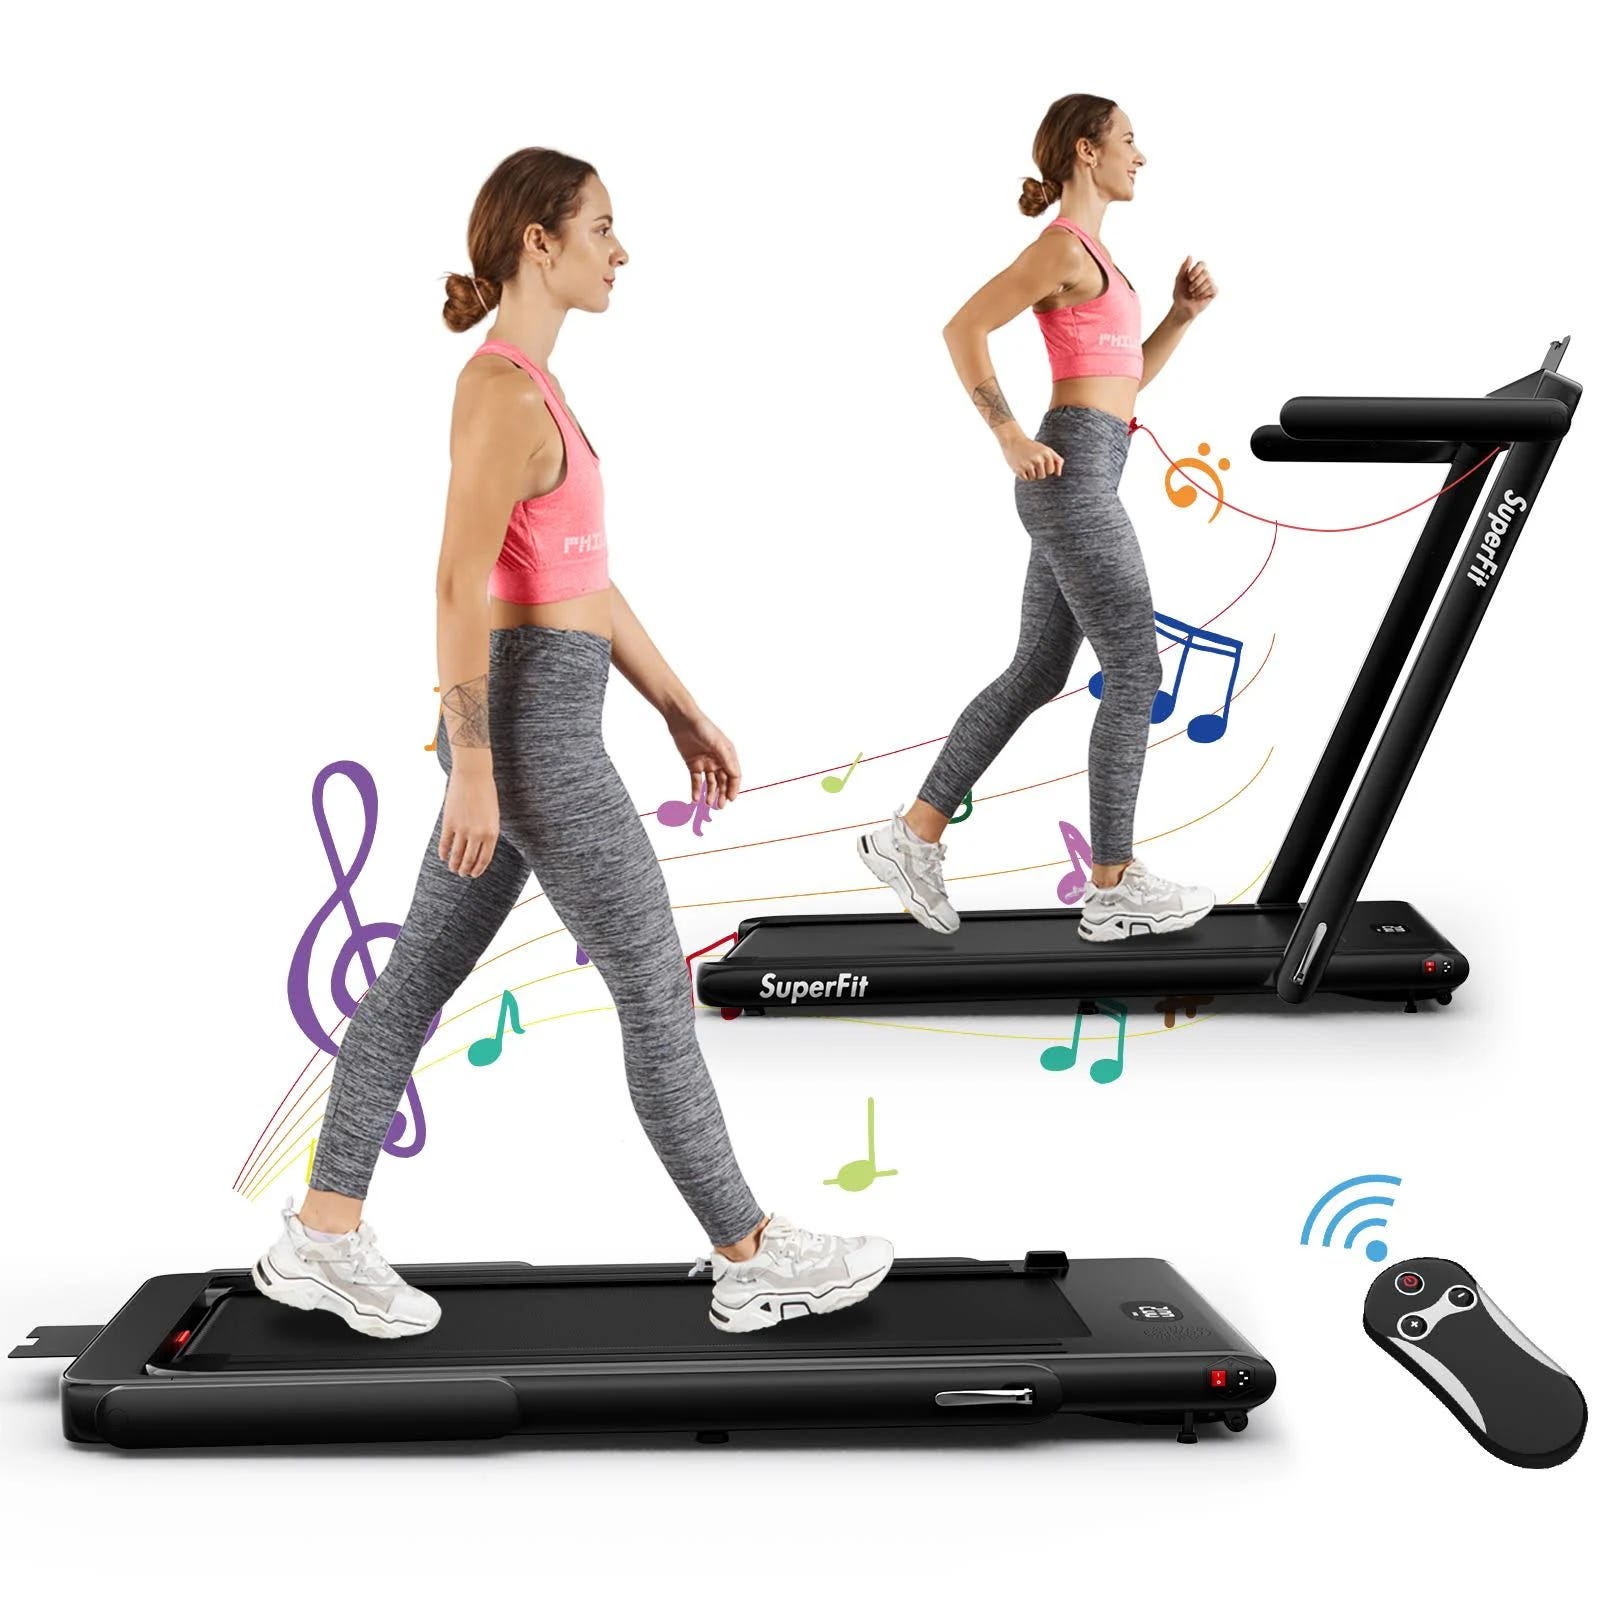 SuperFit 2.25HP 7.5MPH Treadmill with Remote Control and App Control | Image